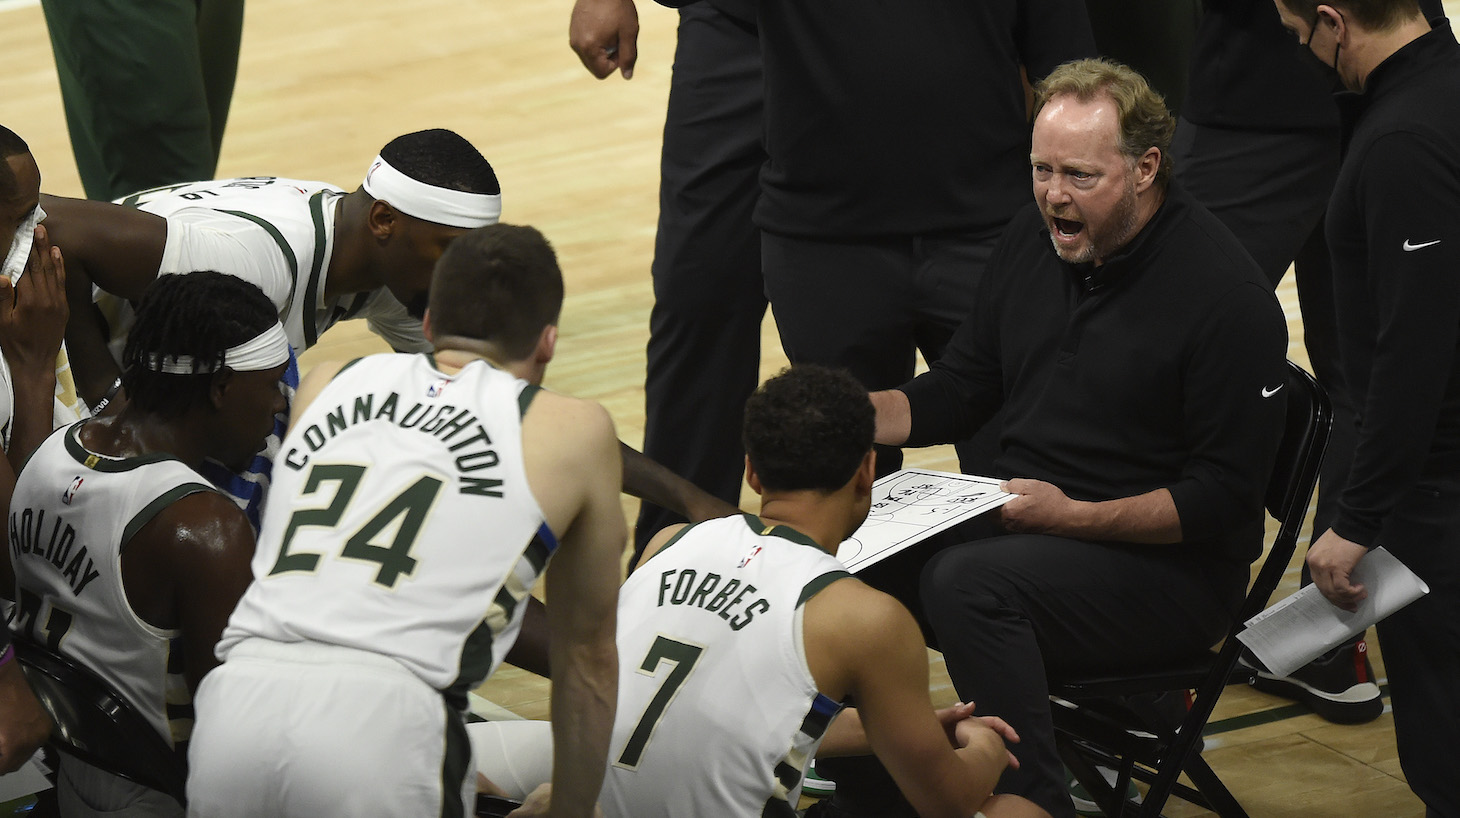 MILWAUKEE, WISCONSIN - JUNE 25: Head coach Mike Budenholzer of the Milwaukee Bucks draws up a play during a huddle during the second half in game two of the Eastern Conference Finals against the Atlanta Hawks at Fiserv Forum on June 25, 2021 in Milwaukee, Wisconsin. NOTE TO USER: User expressly acknowledges and agrees that, by downloading and or using this photograph, User is consenting to the terms and conditions of the Getty Images License Agreement. (Photo by Patrick McDermott/Getty Images)